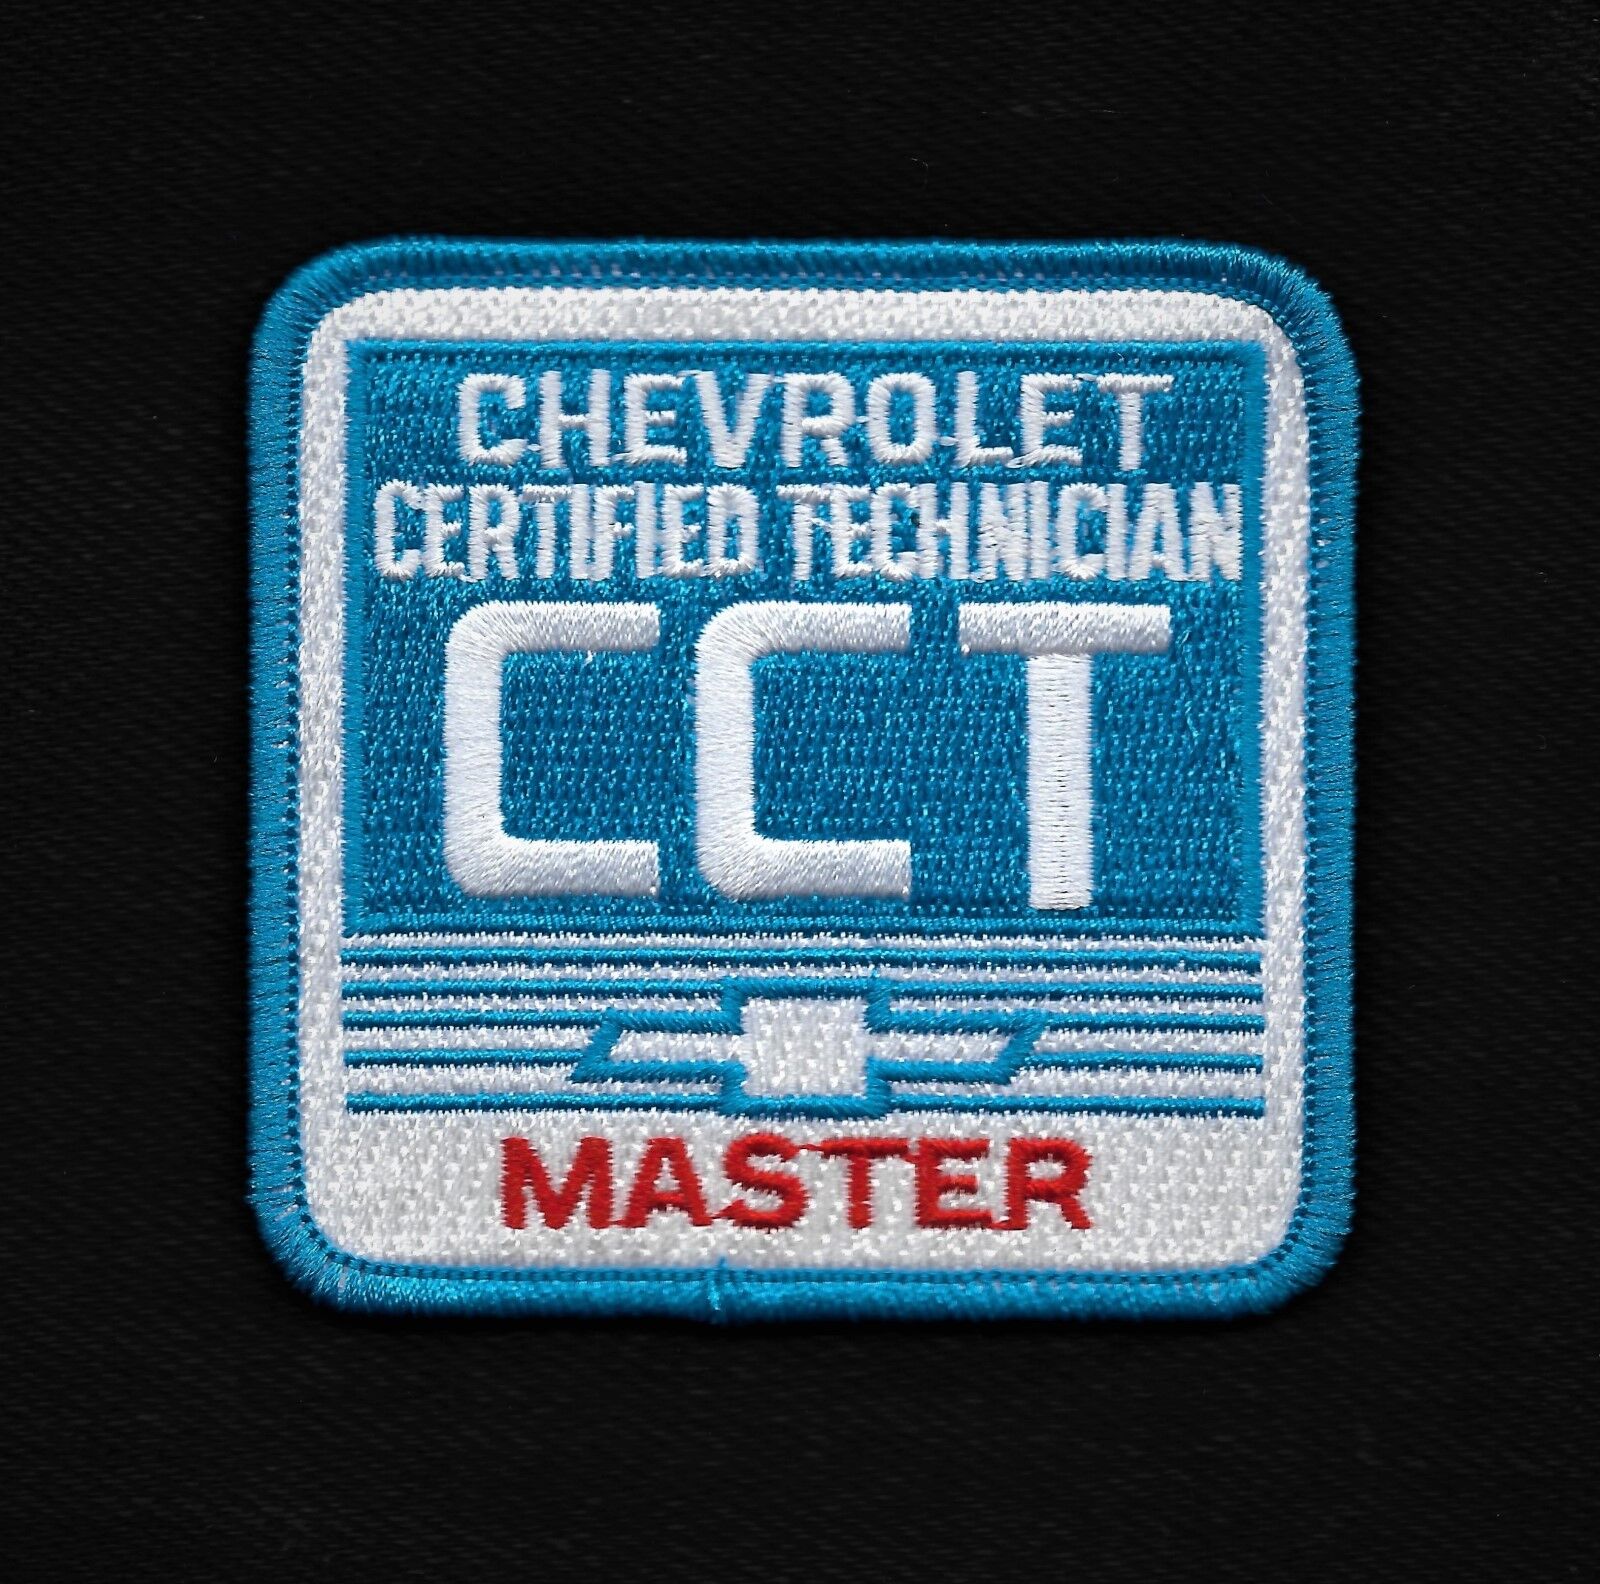 VTG STYLE CHEVROLET CERTIFIED TECHNICIAN CCT MASTER Automotive Collectors Patch